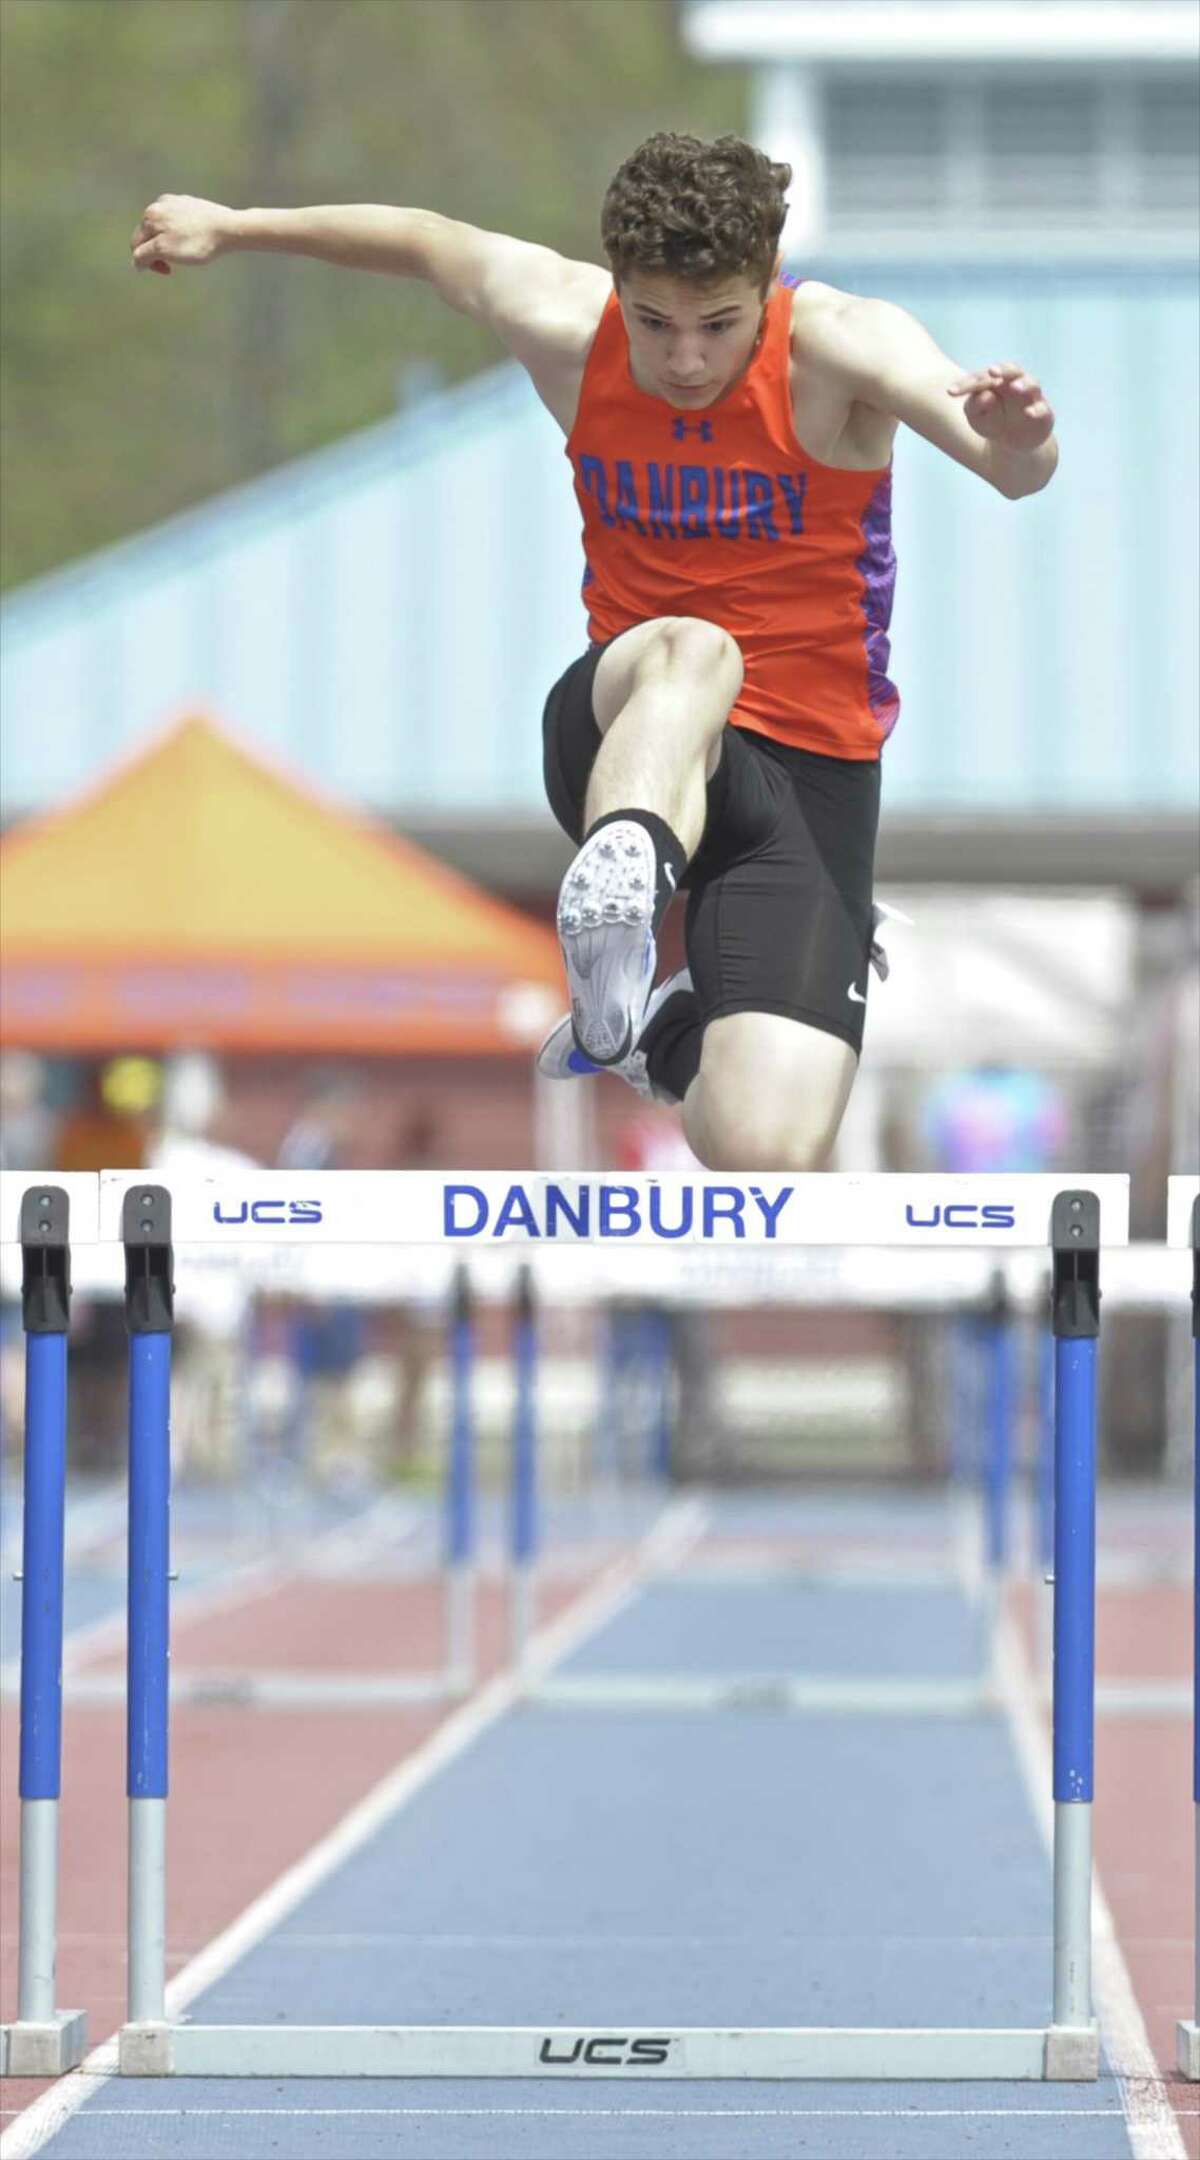 Danhbury’s Jaden Cazorla competes in the 300-meter hurdles during the O’Grady Relays on April 29, 2017 at Danbury High School.